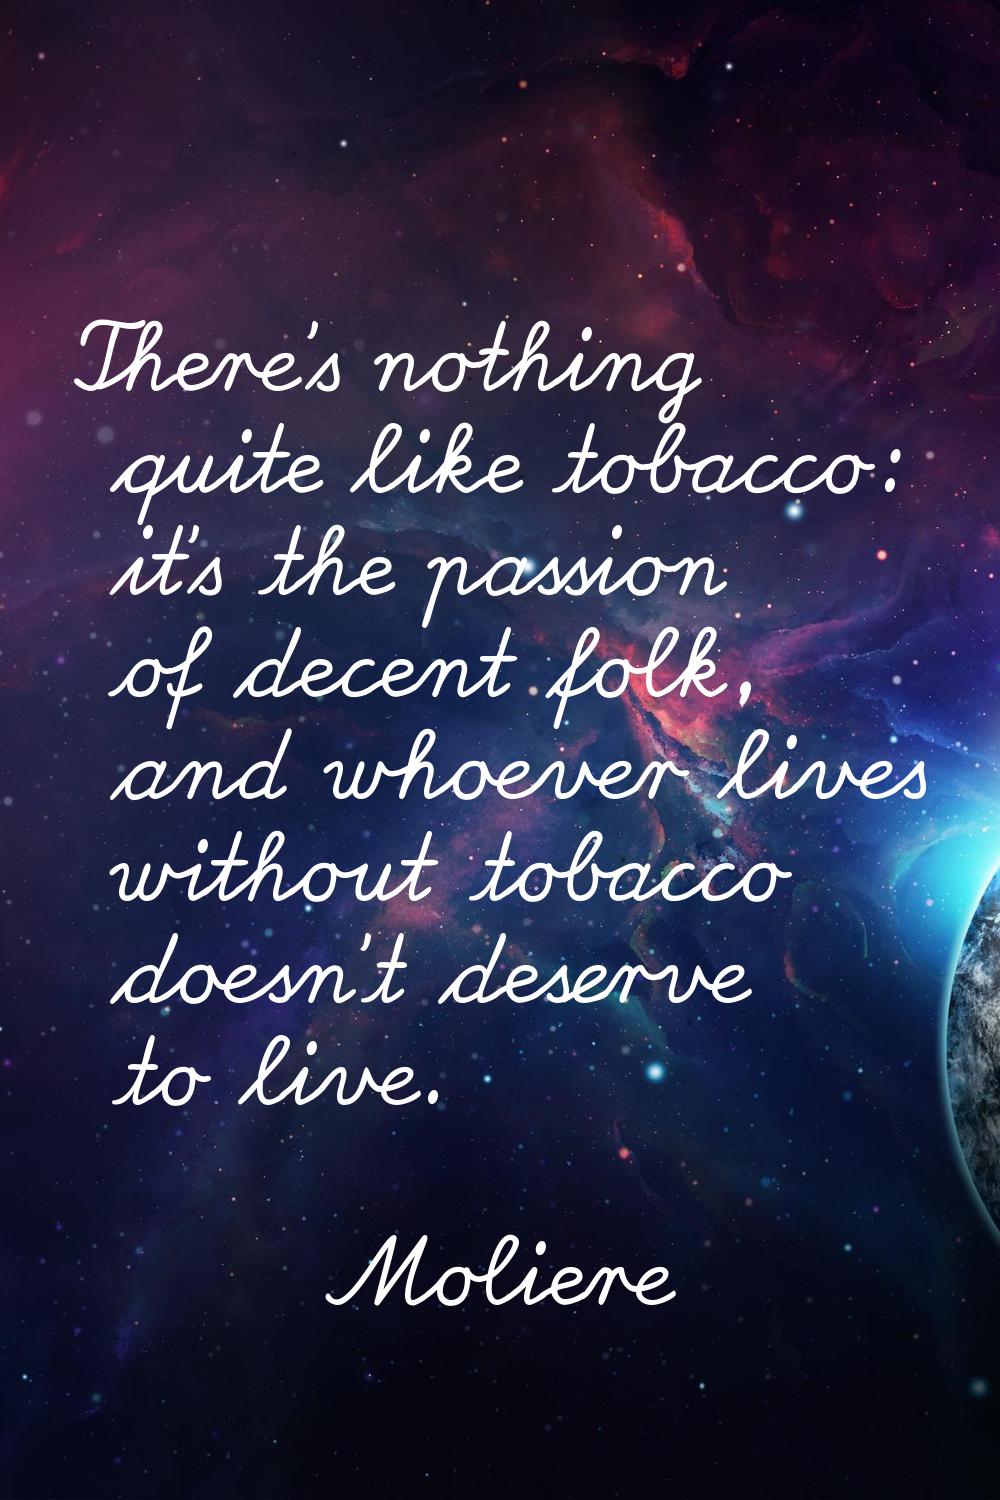 There's nothing quite like tobacco: it's the passion of decent folk, and whoever lives without toba